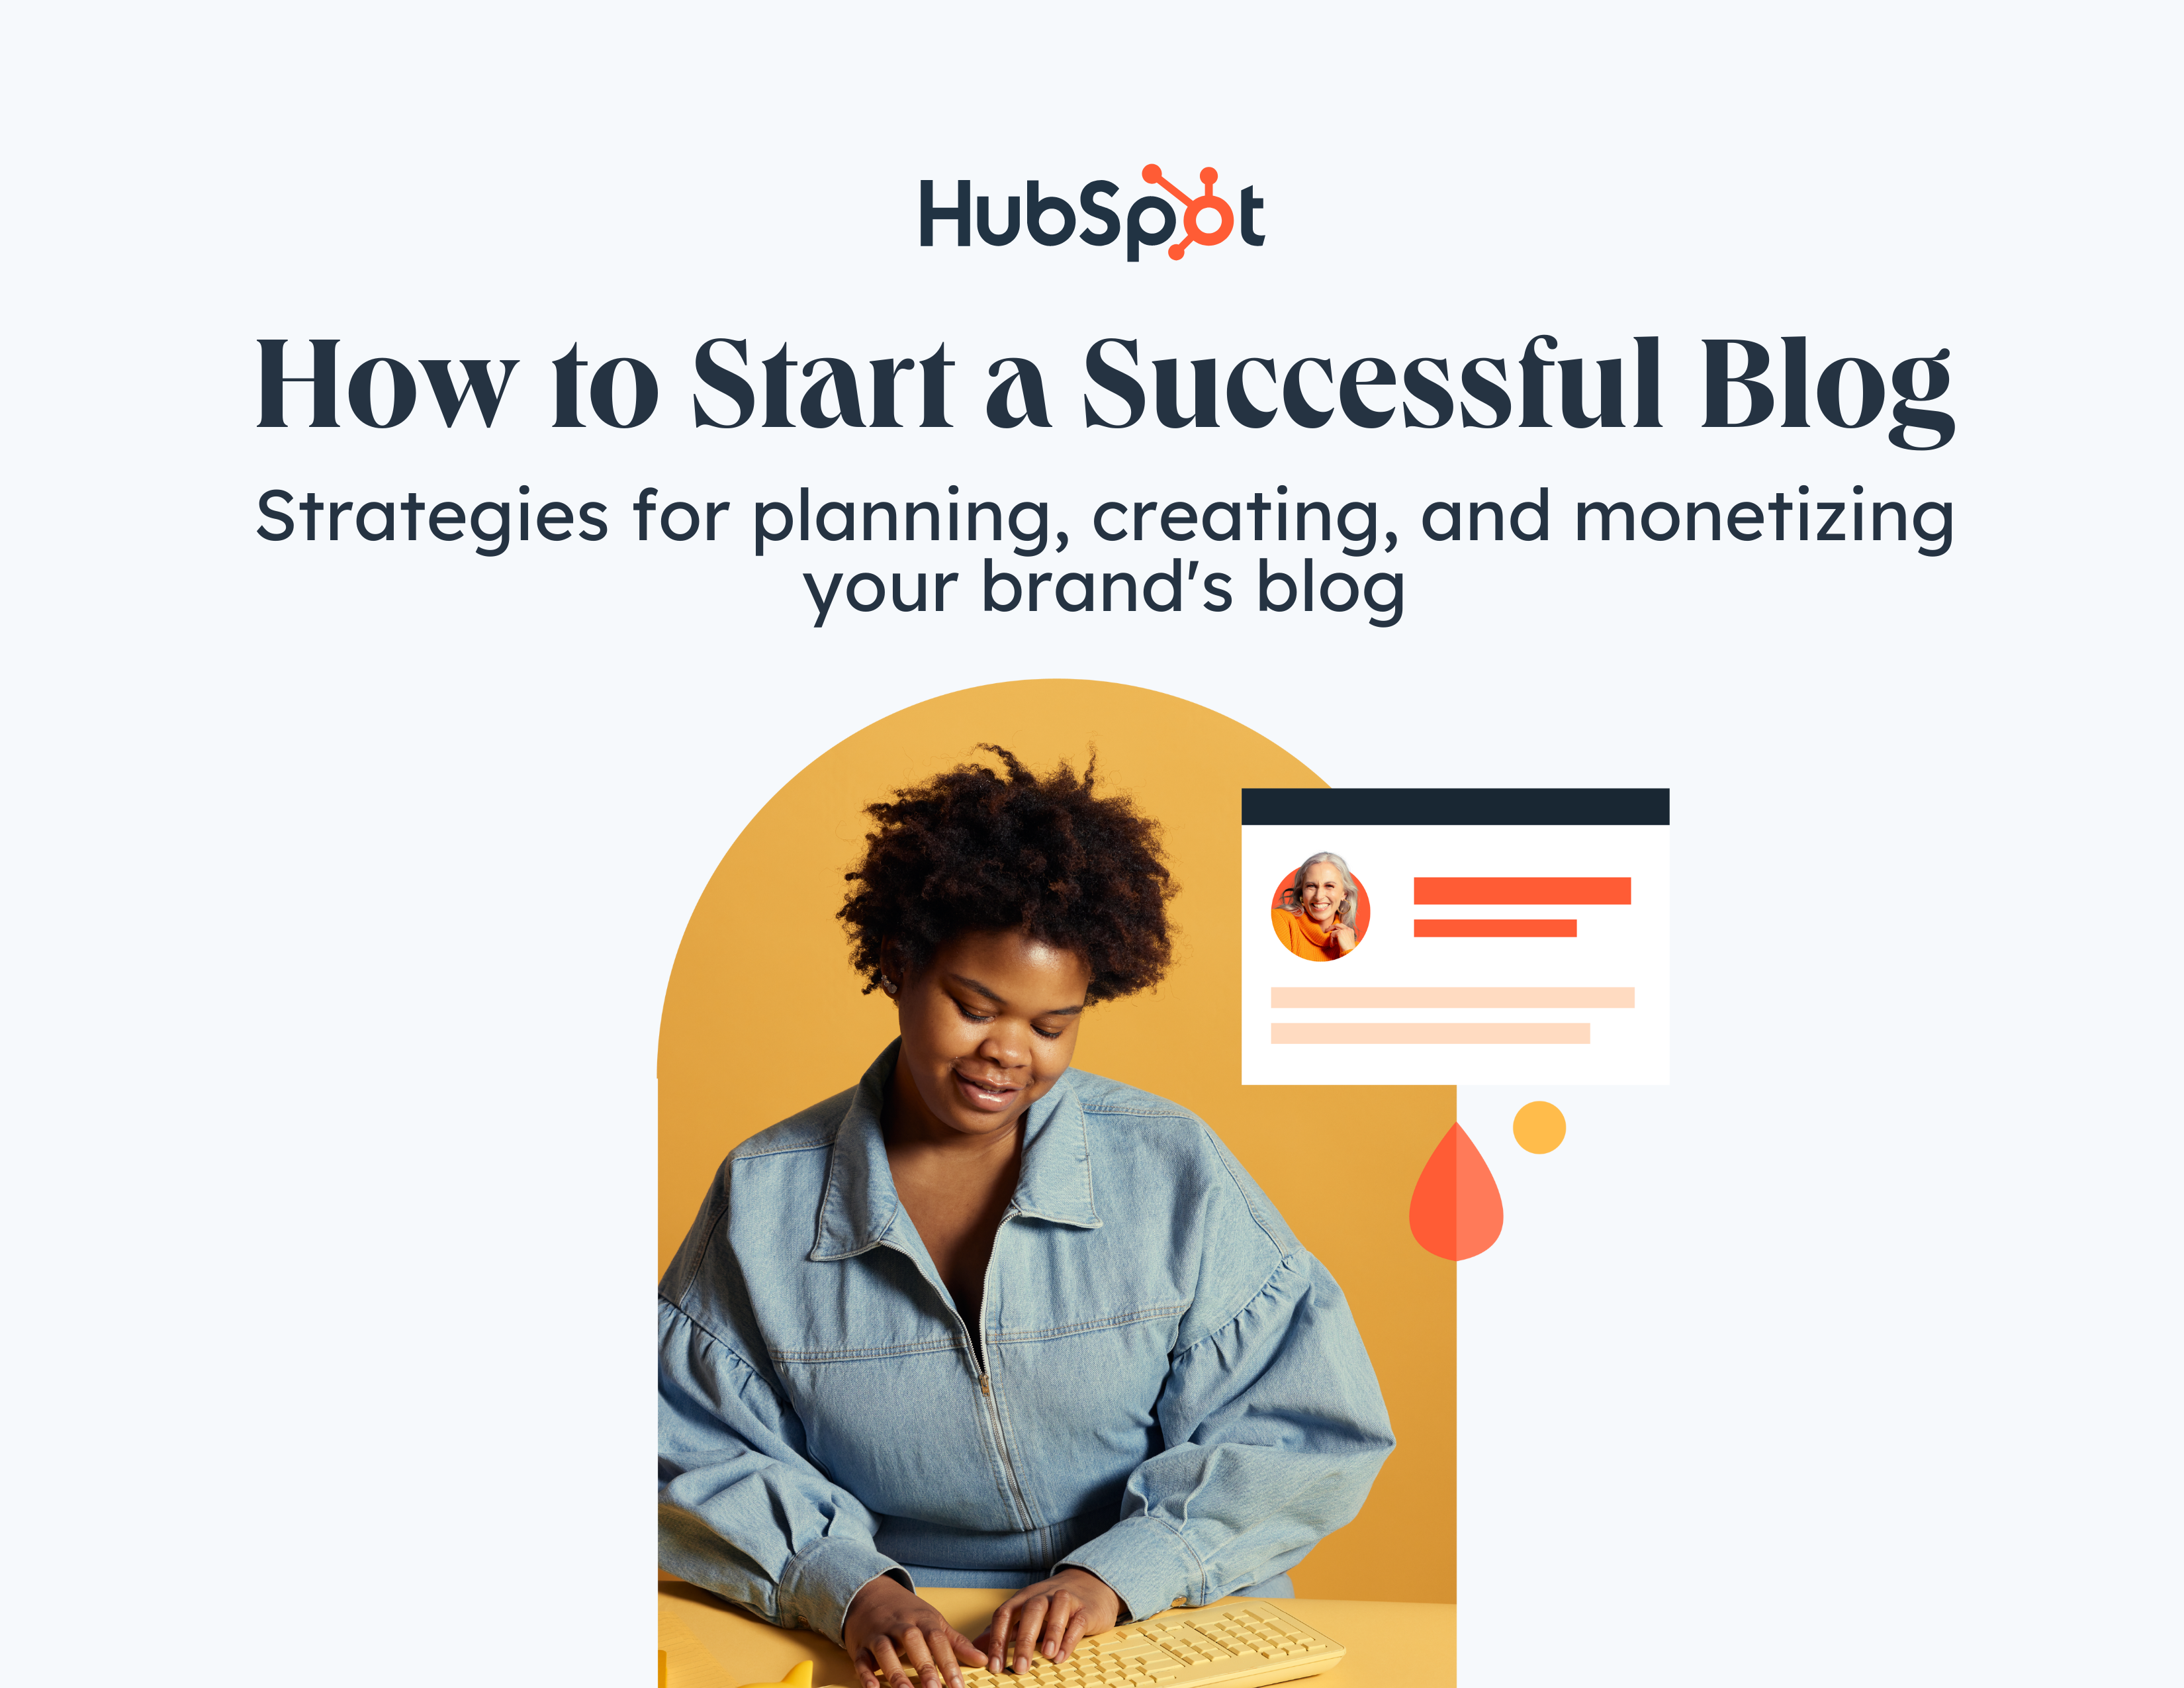 ebook - How to Start a Successful Blog